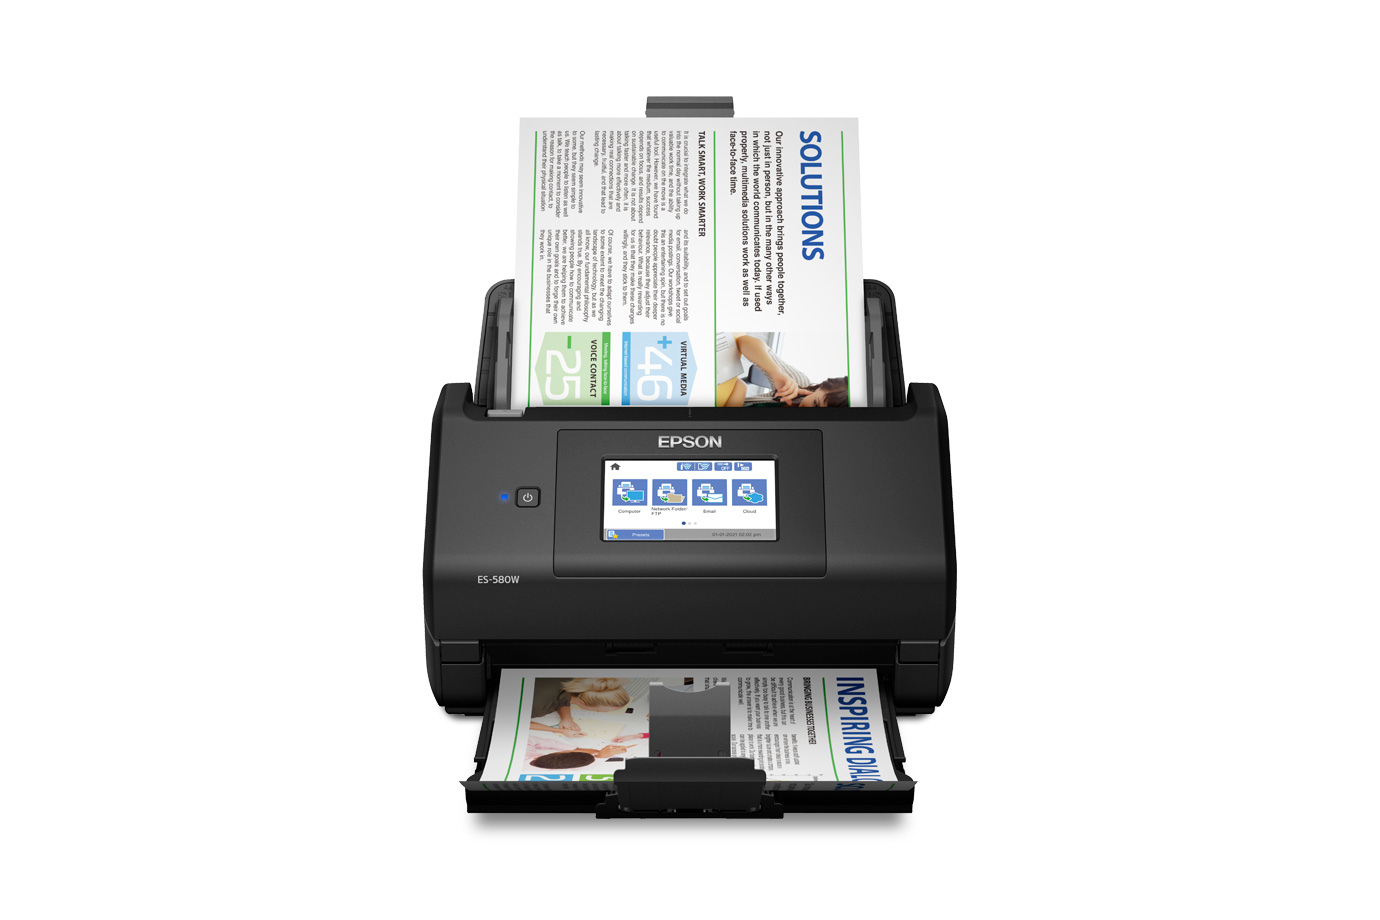 Epson P-7000 | Support | Epson US